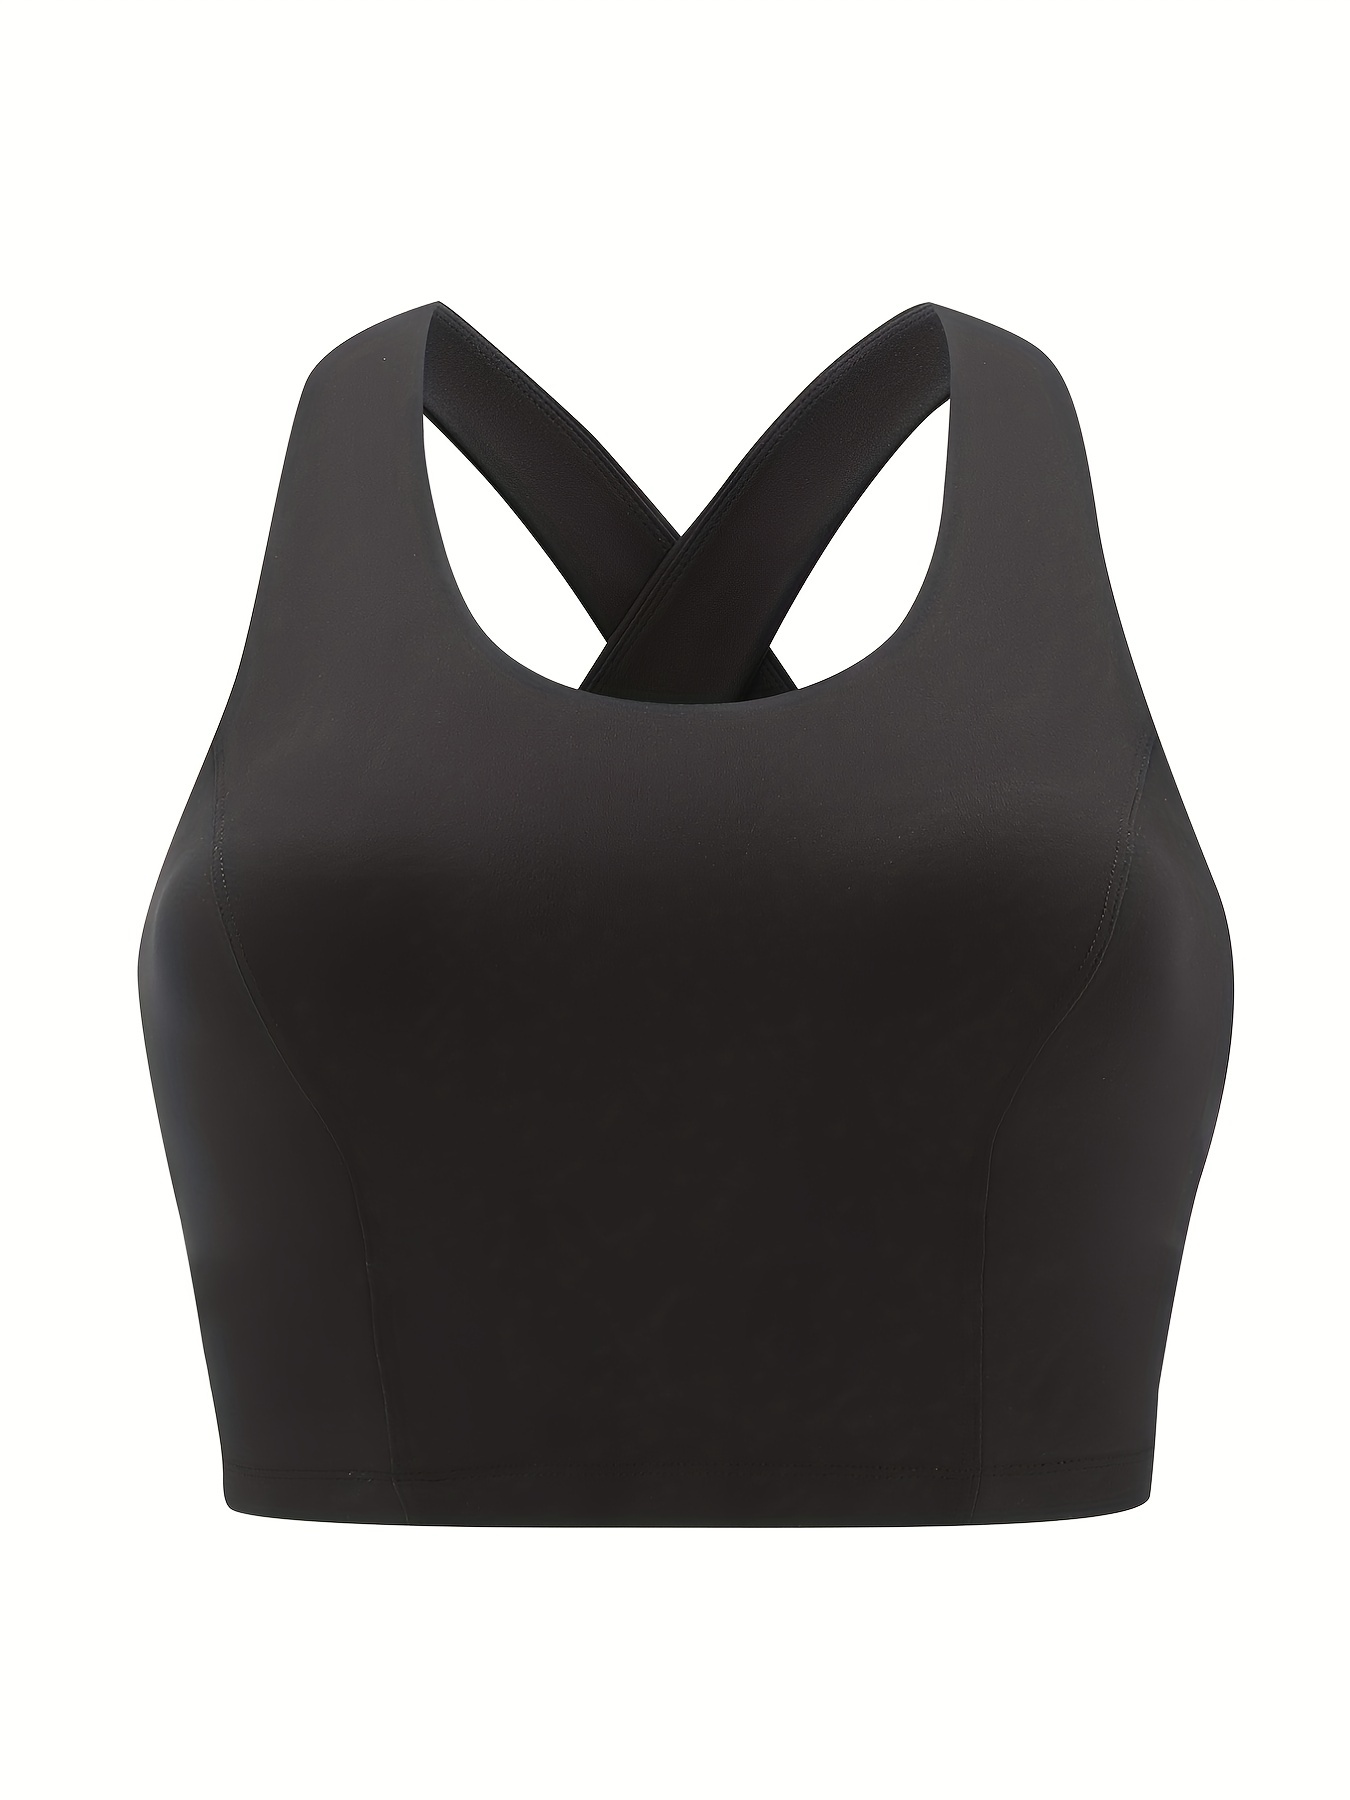 High Support Sports Bra for Women - Cross Back Straps, Removable Pads, Soft  and Comfortable - Perfect for Yoga, Fitness, and Workouts